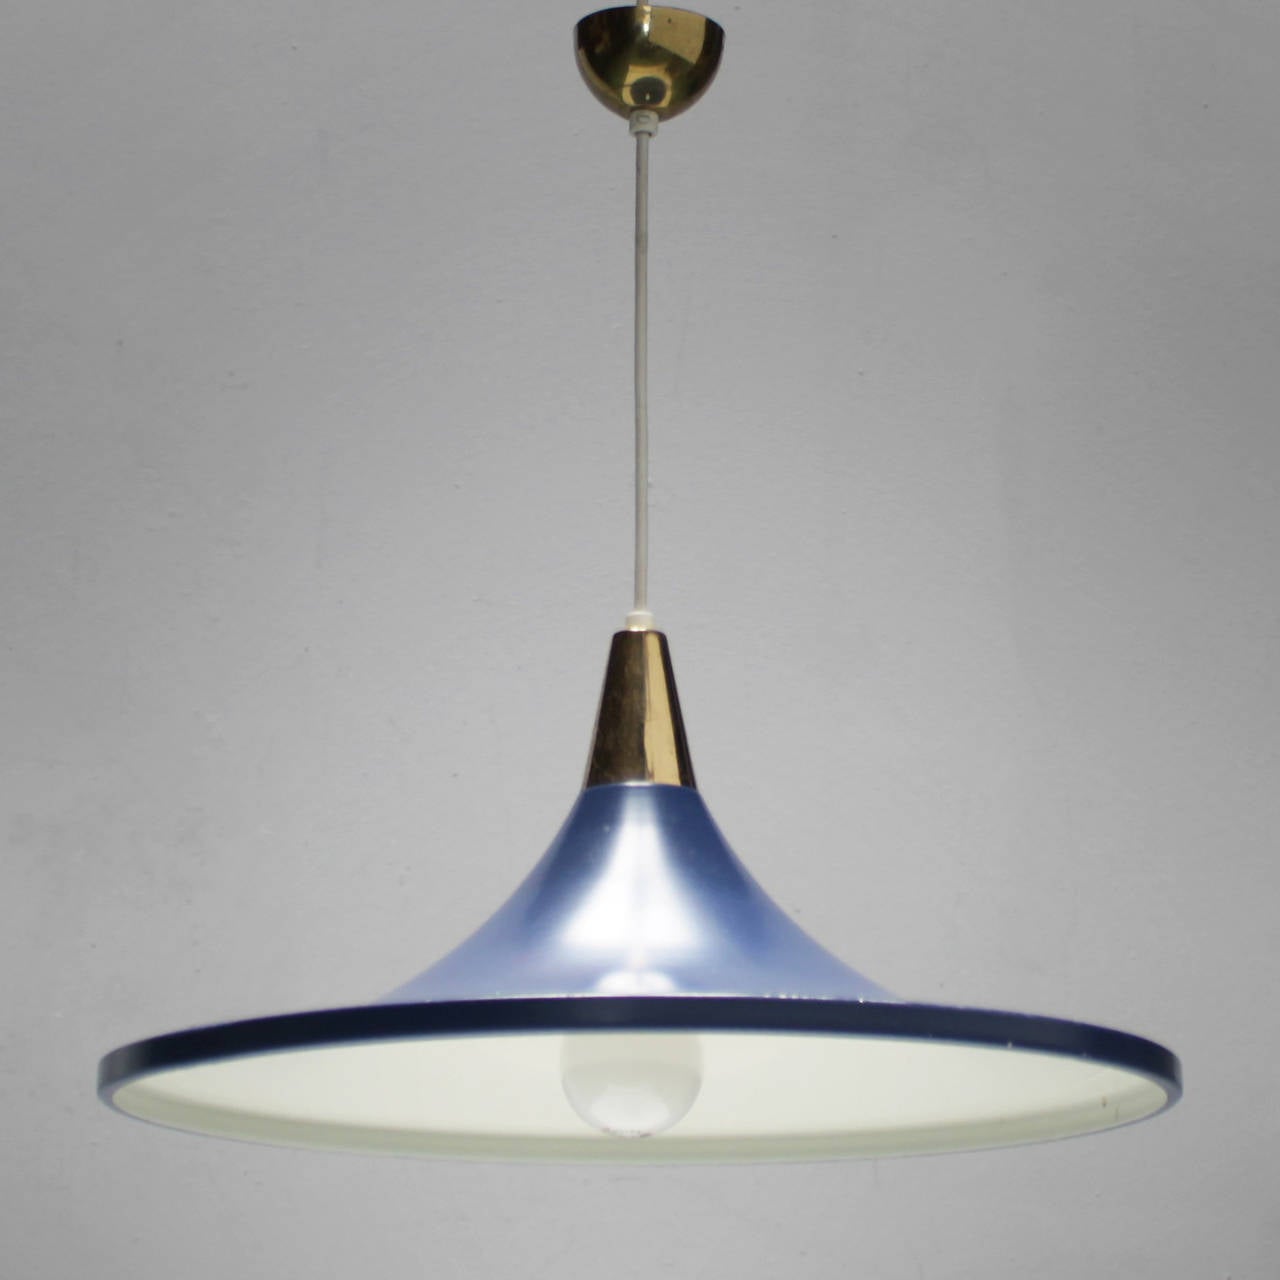 Rare blue pendant by Stilnovo Italy Milano. Brass with original beautiful blue lacquered shade. Marked. Diameter 17.3 in. (44 cm), height of the shade 7.9 inches (20 cm).